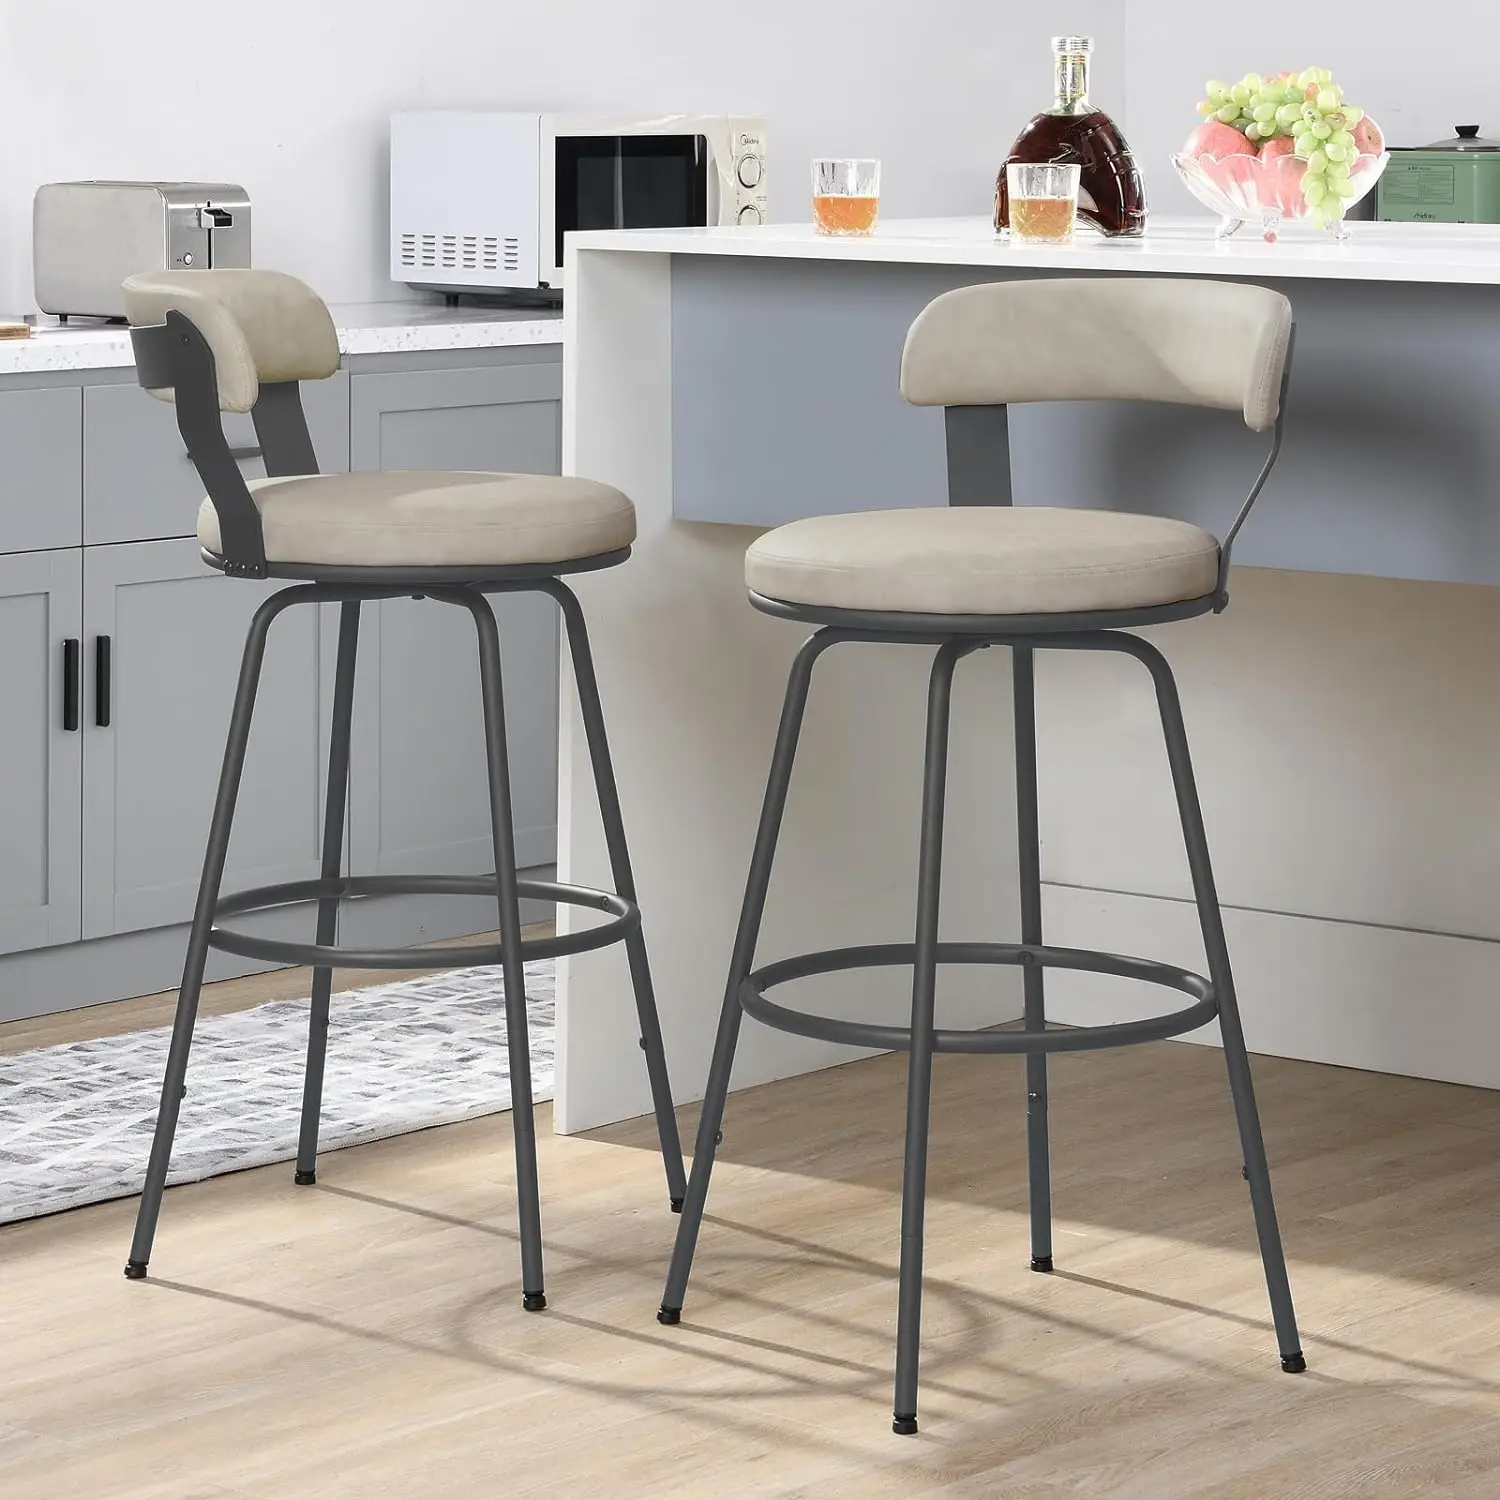 

Bar Stools Set of 2-Metal Stools for Kitchen Counter PU Leather Barstools Swivel Bar Chairs for Dining Cafe,Metal Footrest